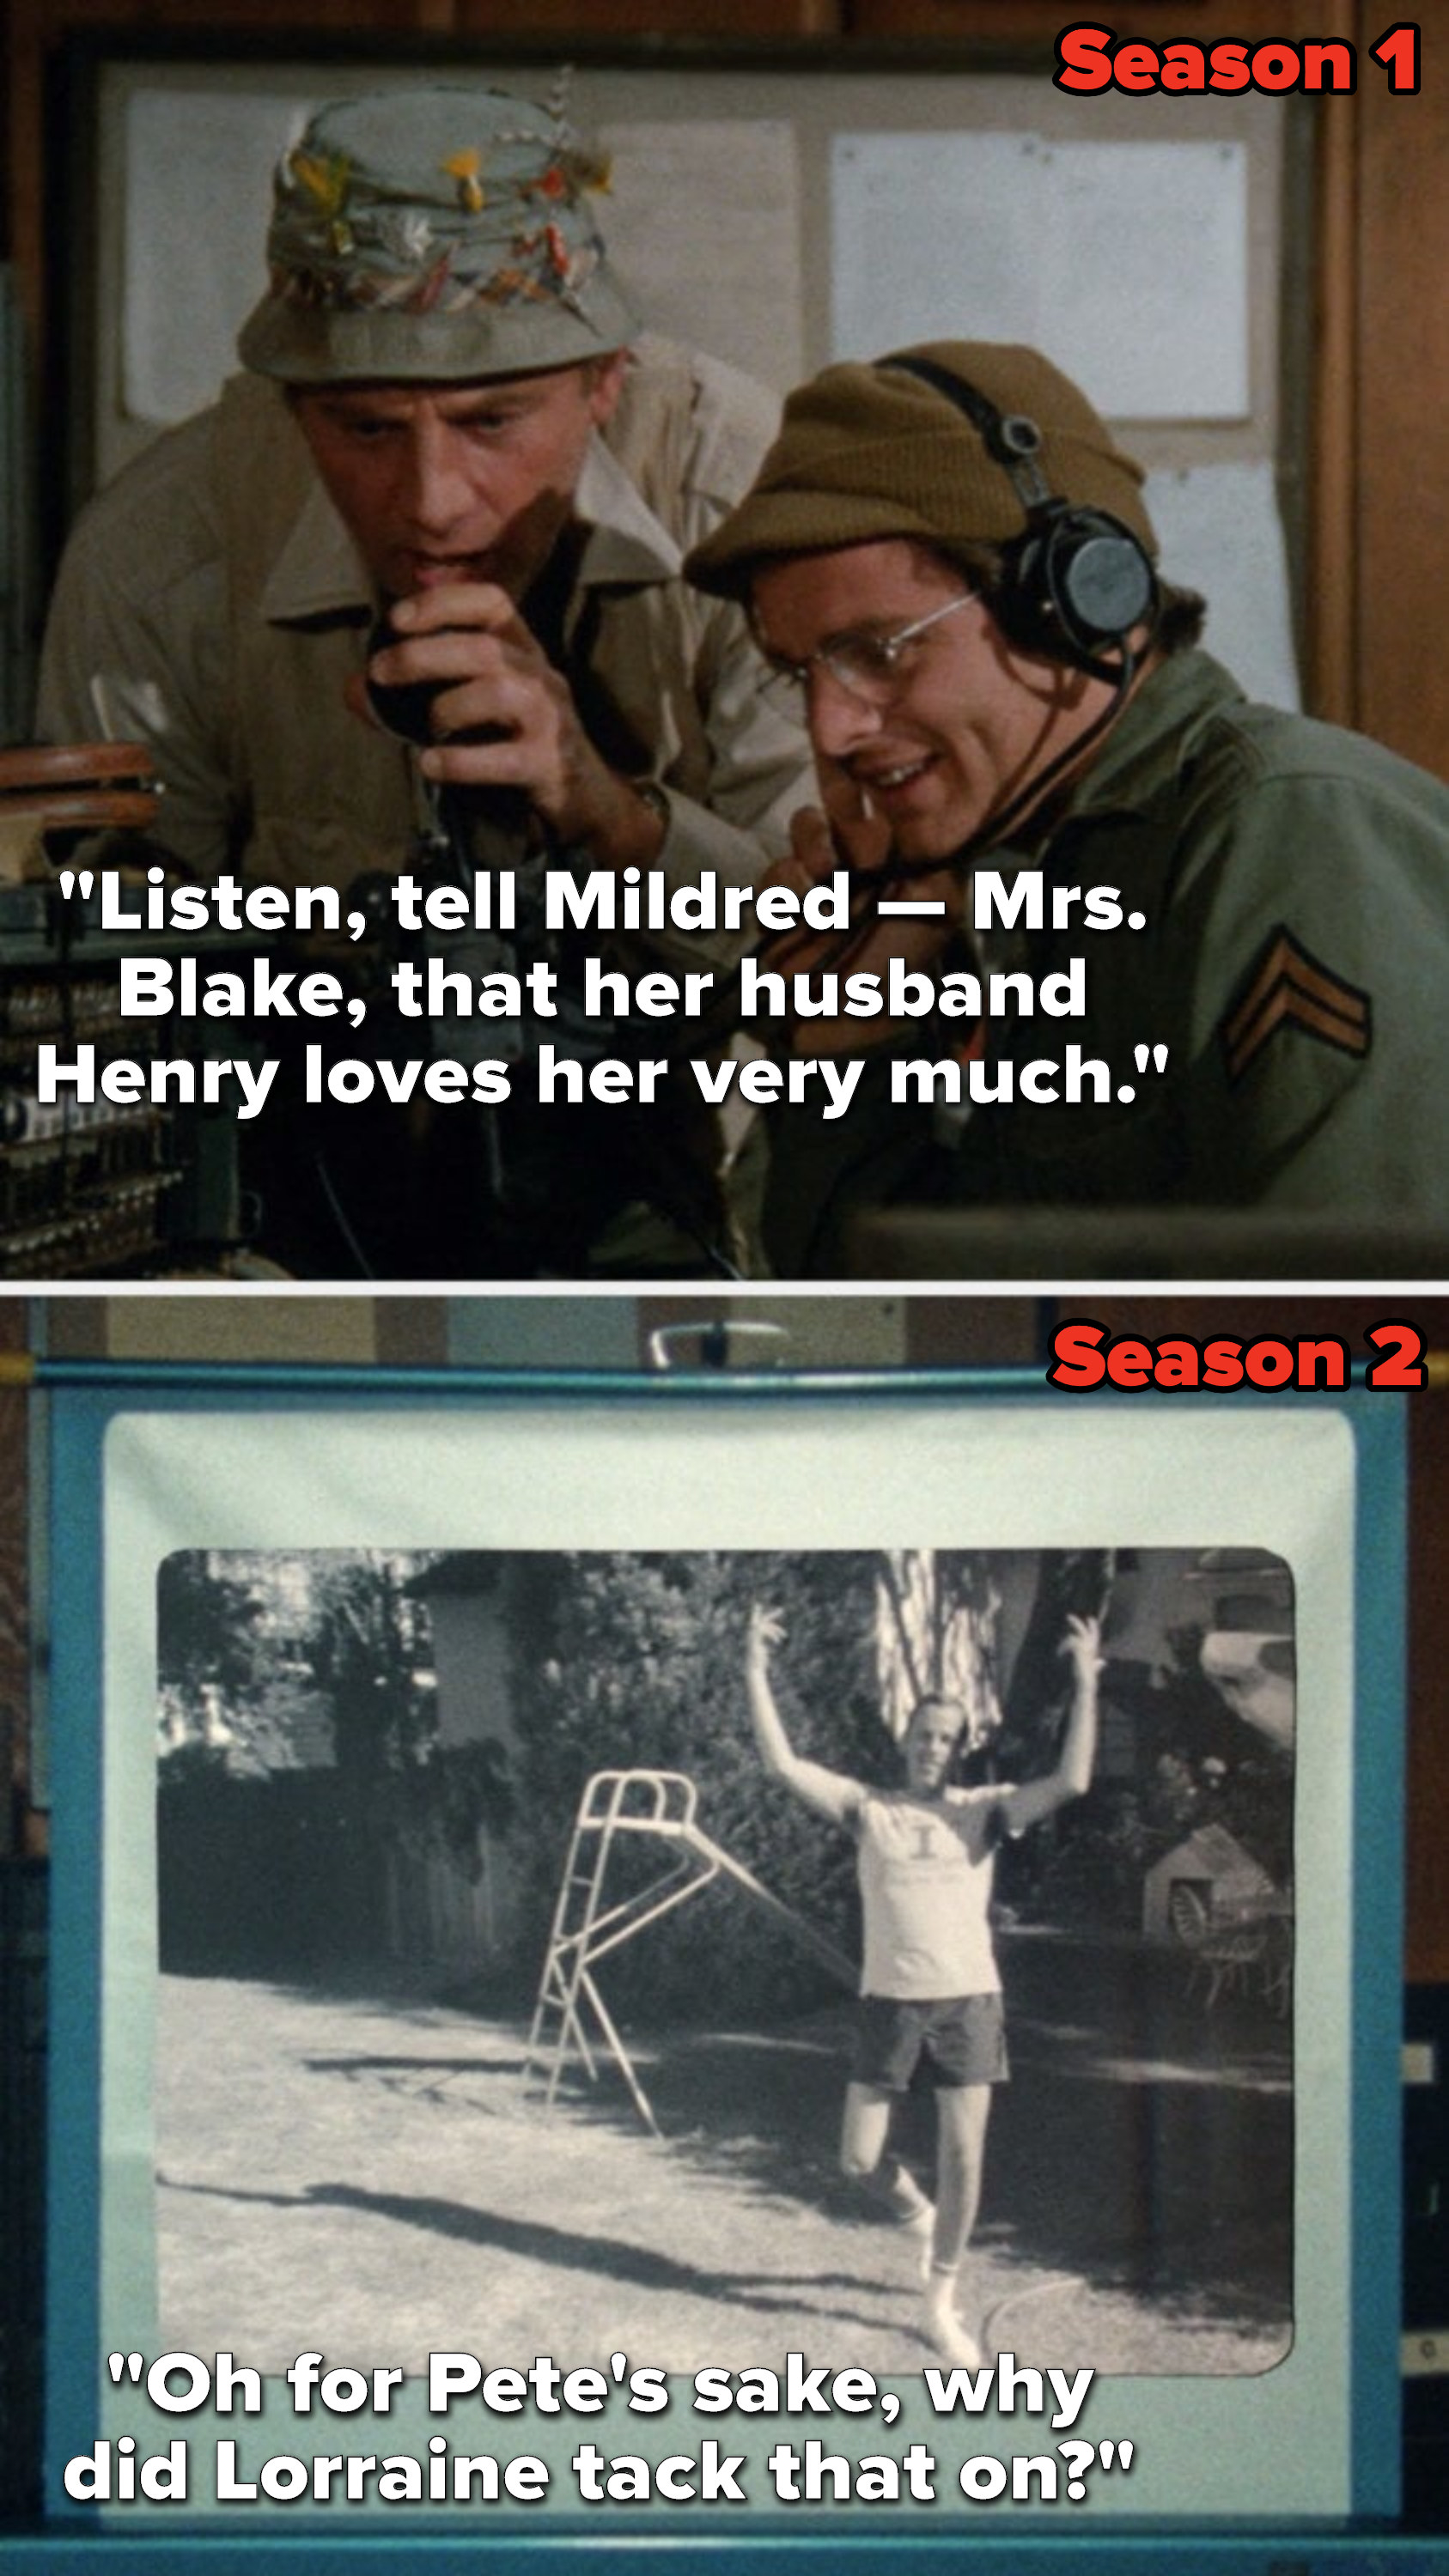 In Season 1, Henry says, &quot;Listen, tell Mildred — Mrs Blake, that her husband Henry loves her very much,&quot; but in Season 2 Henry says, &quot;Oh for Pete&#x27;s sake, why did Lorraine tack that on&quot;